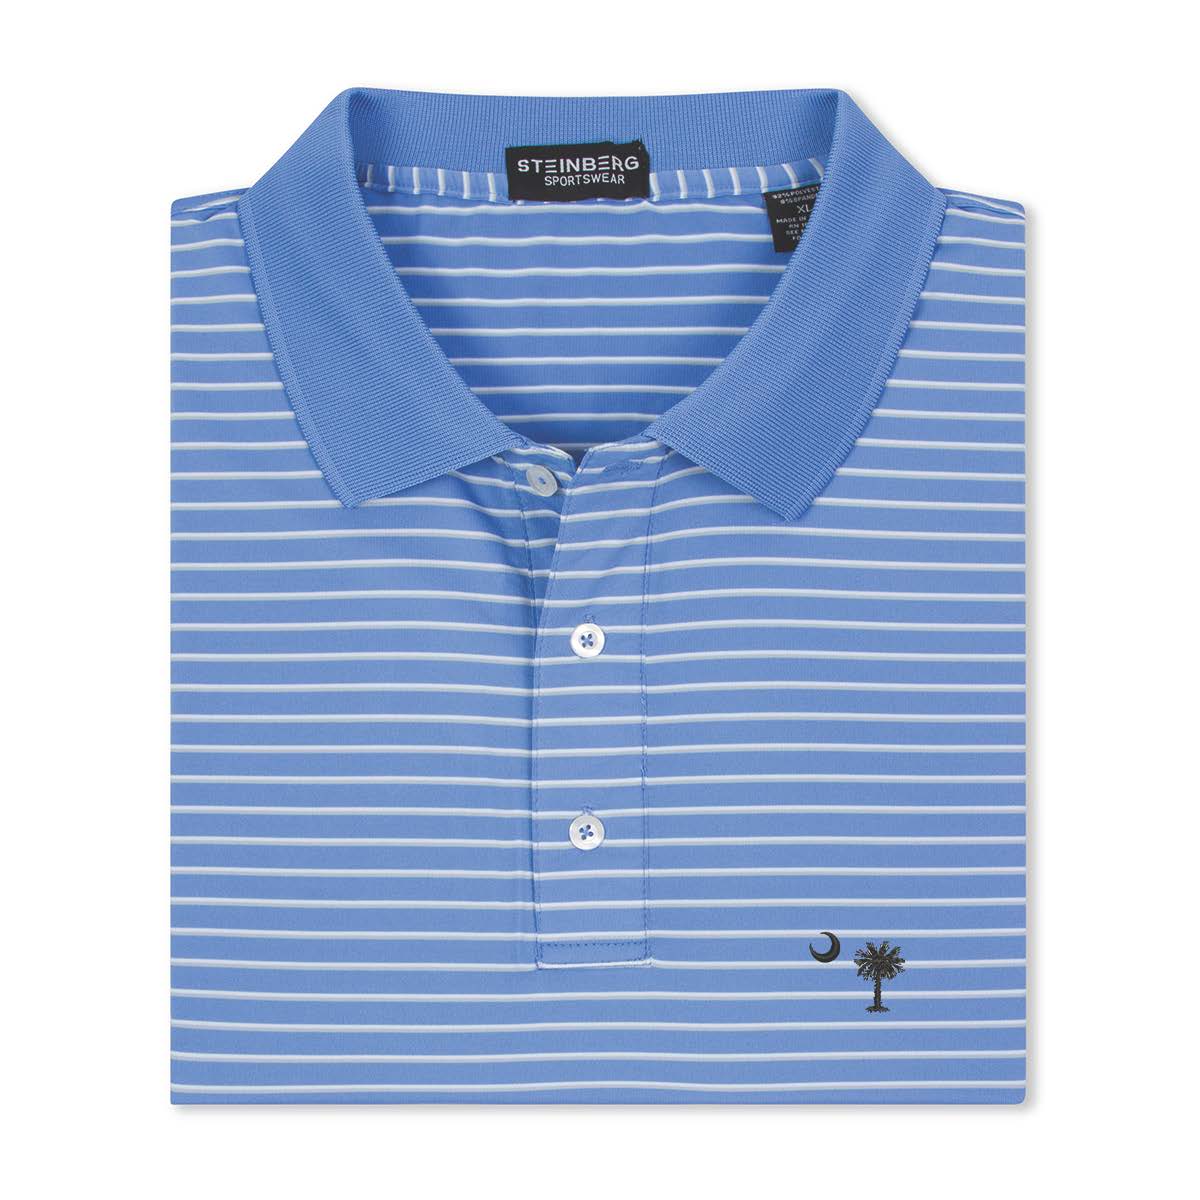 The Dawn Patrol Performance Polo the Palmetto Moon Collection